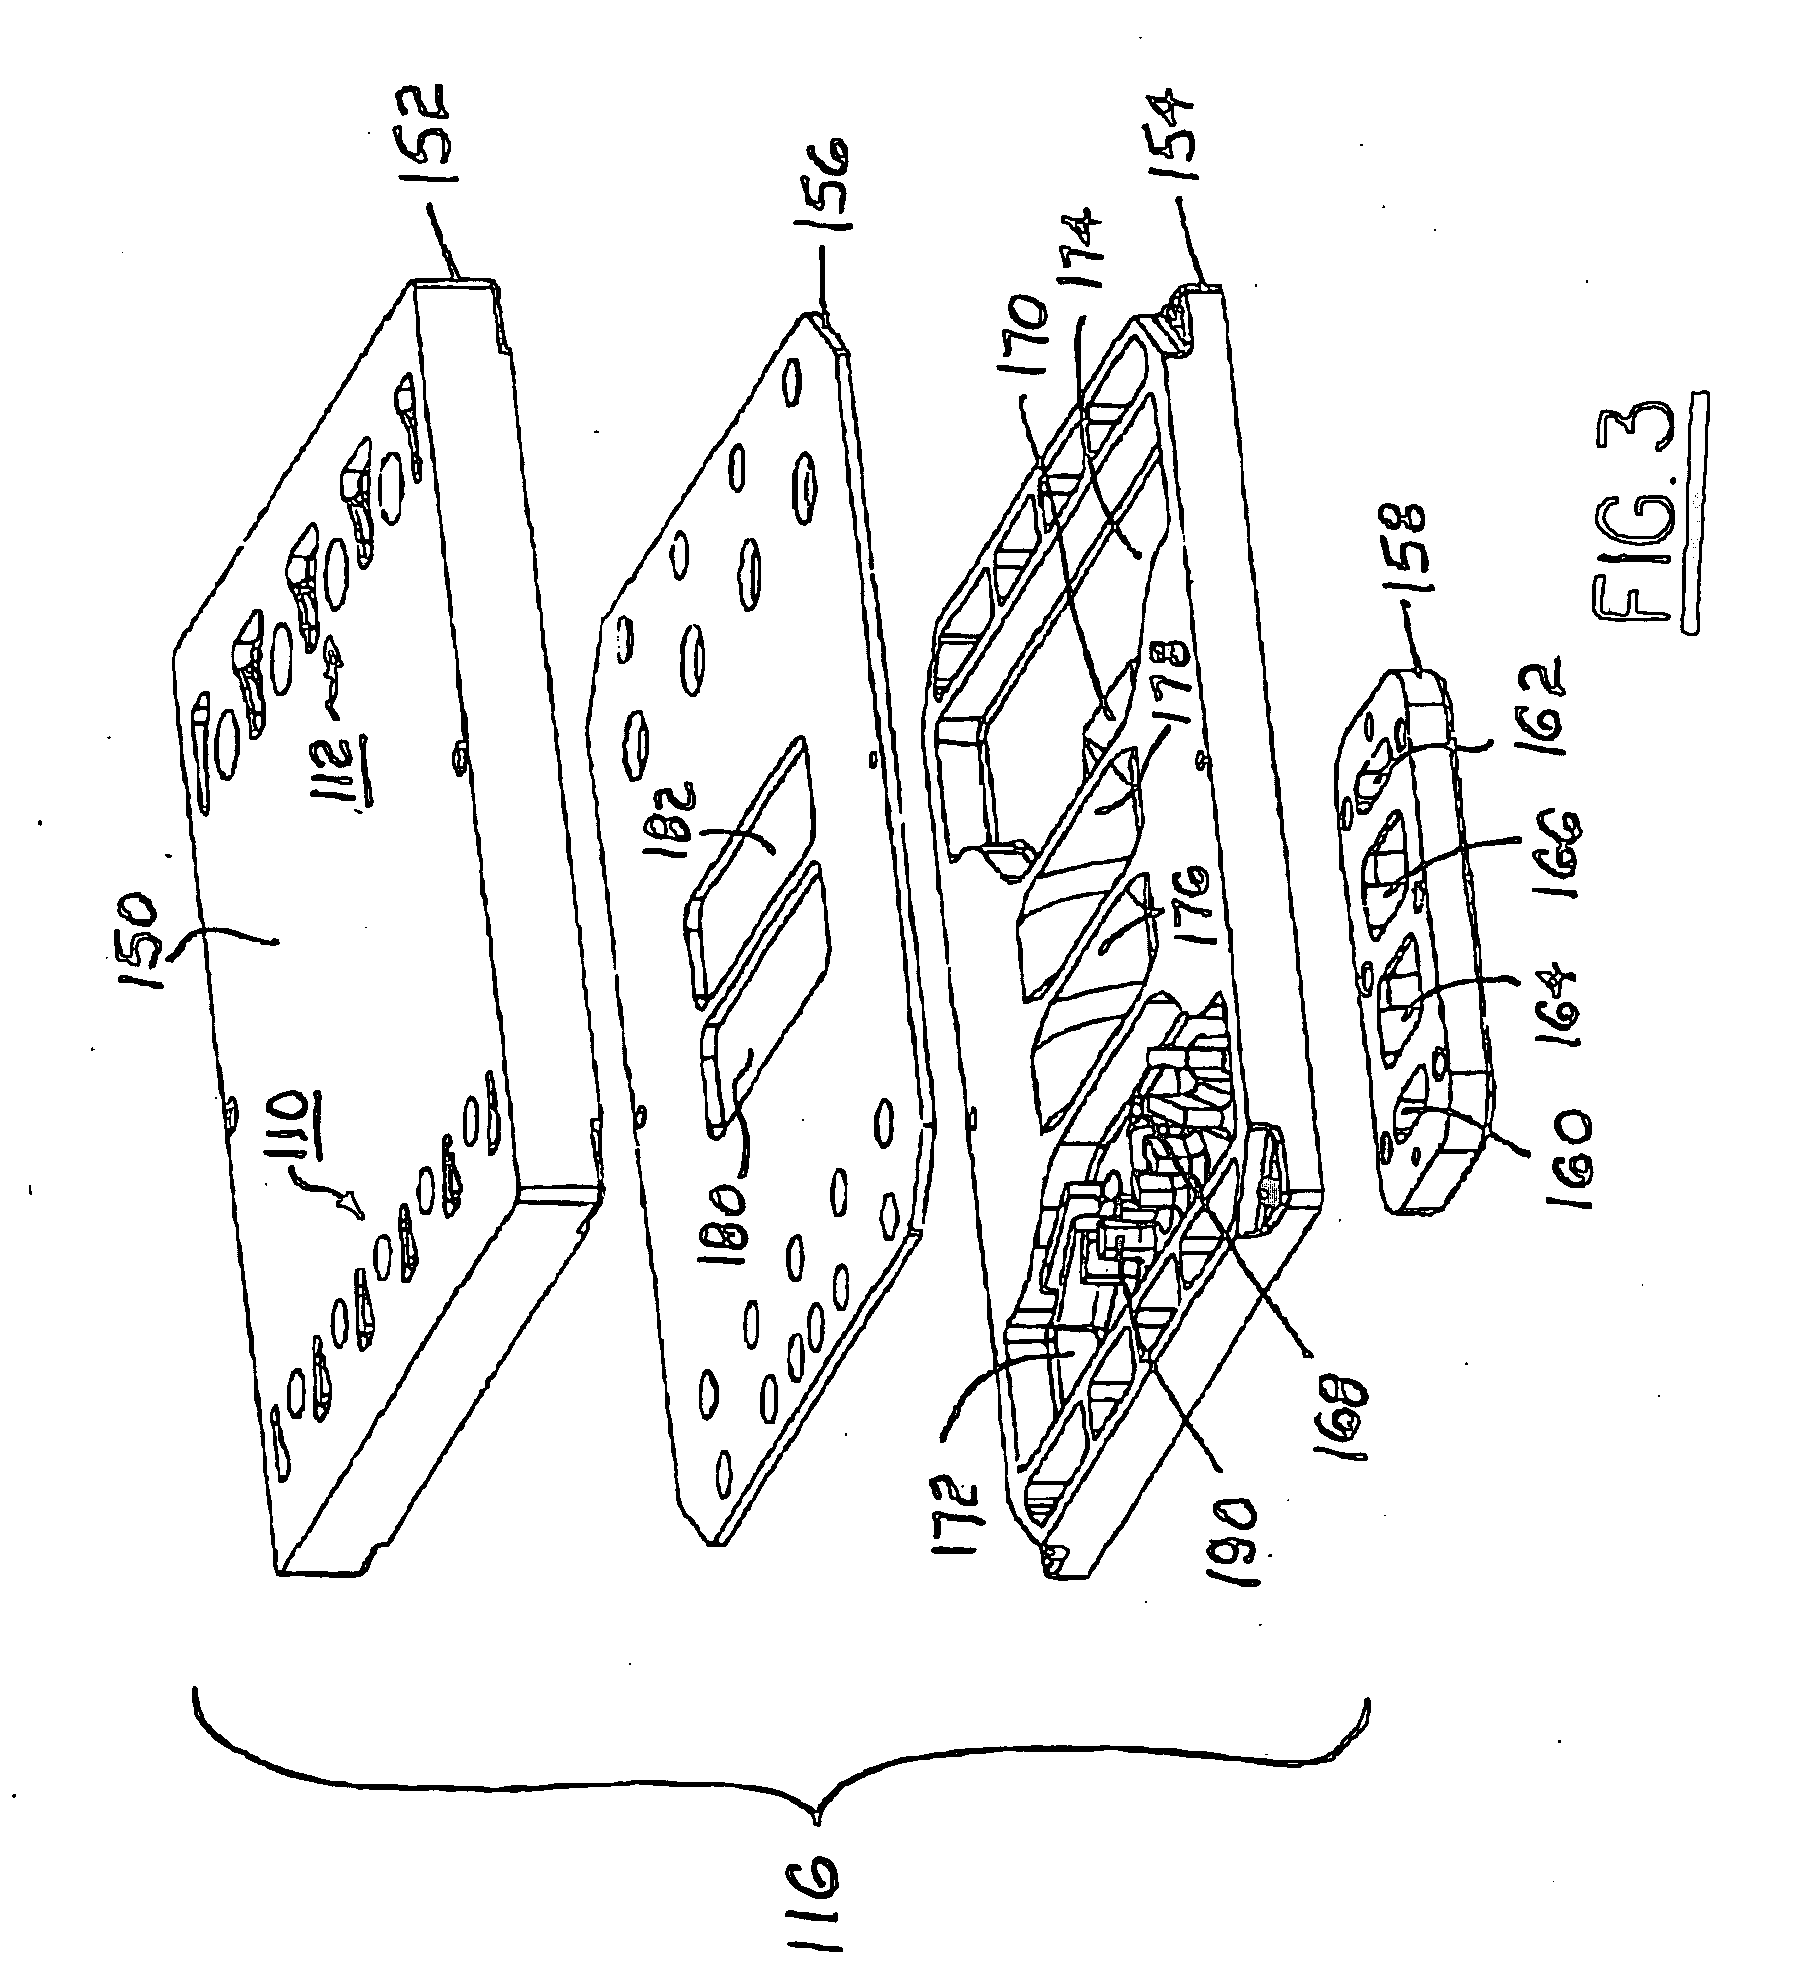 Solid oxide fuel cell stack having an integral gas distribution manifold